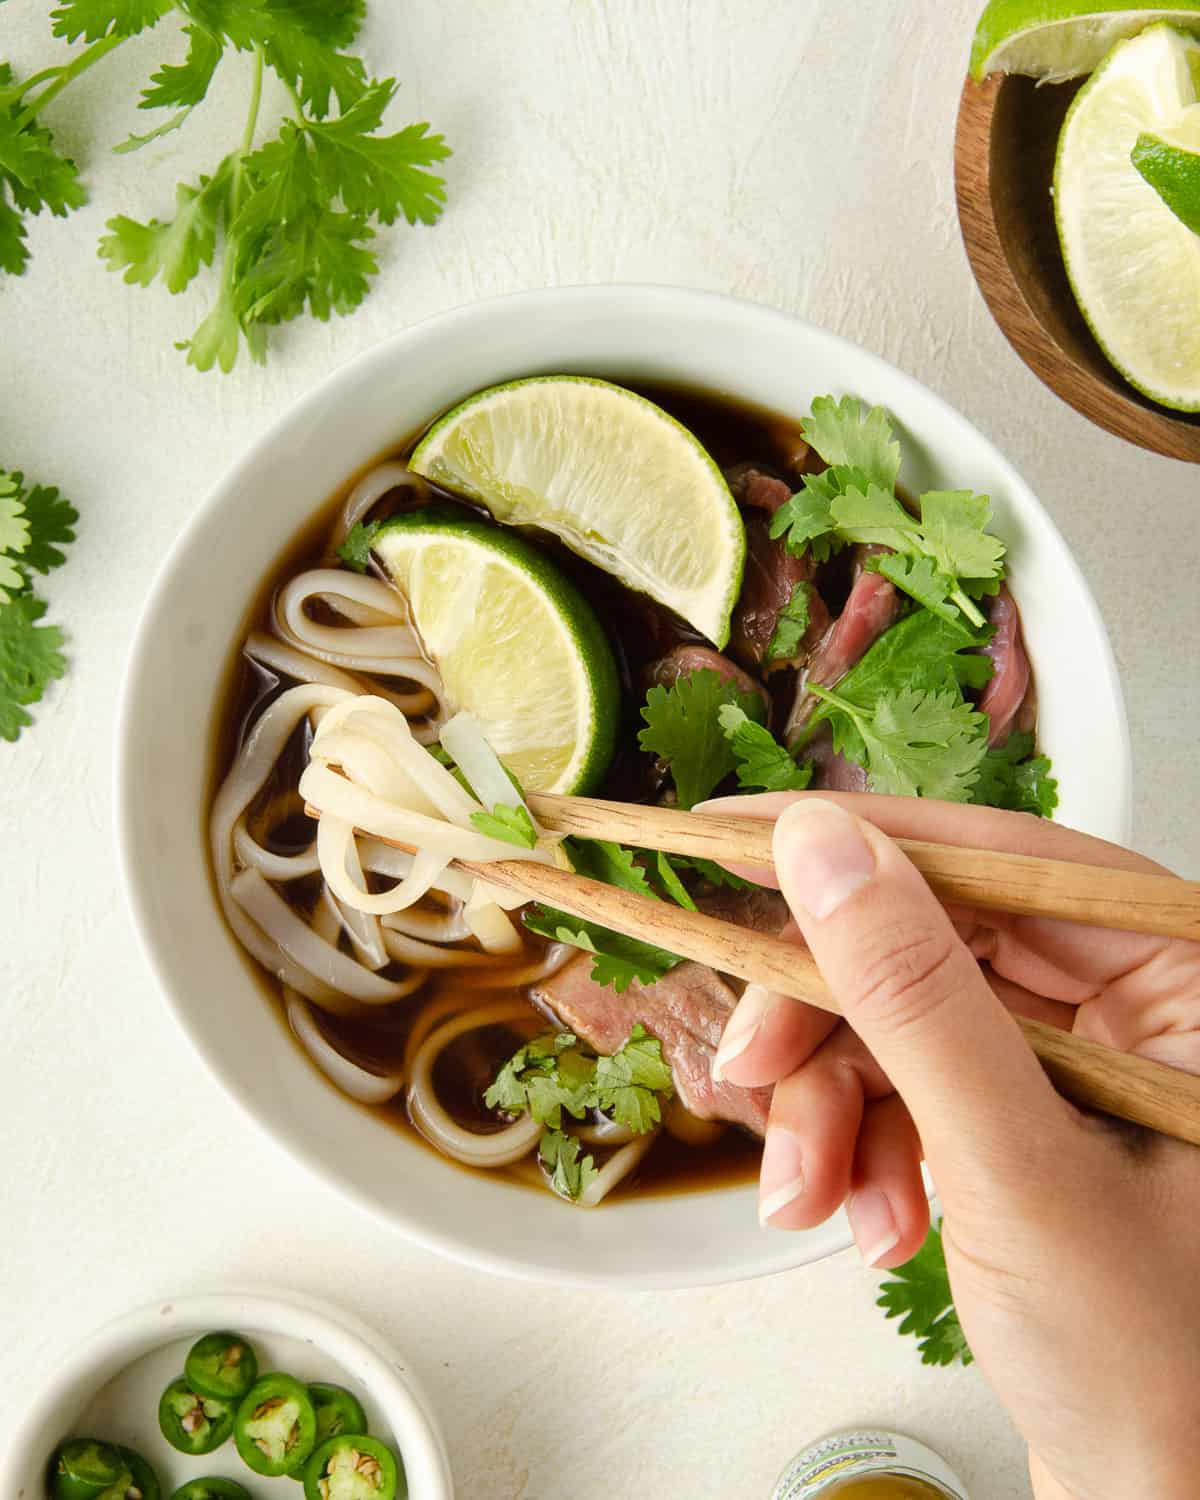 A hand holding chopsticks picking up a noodle from a bowl.